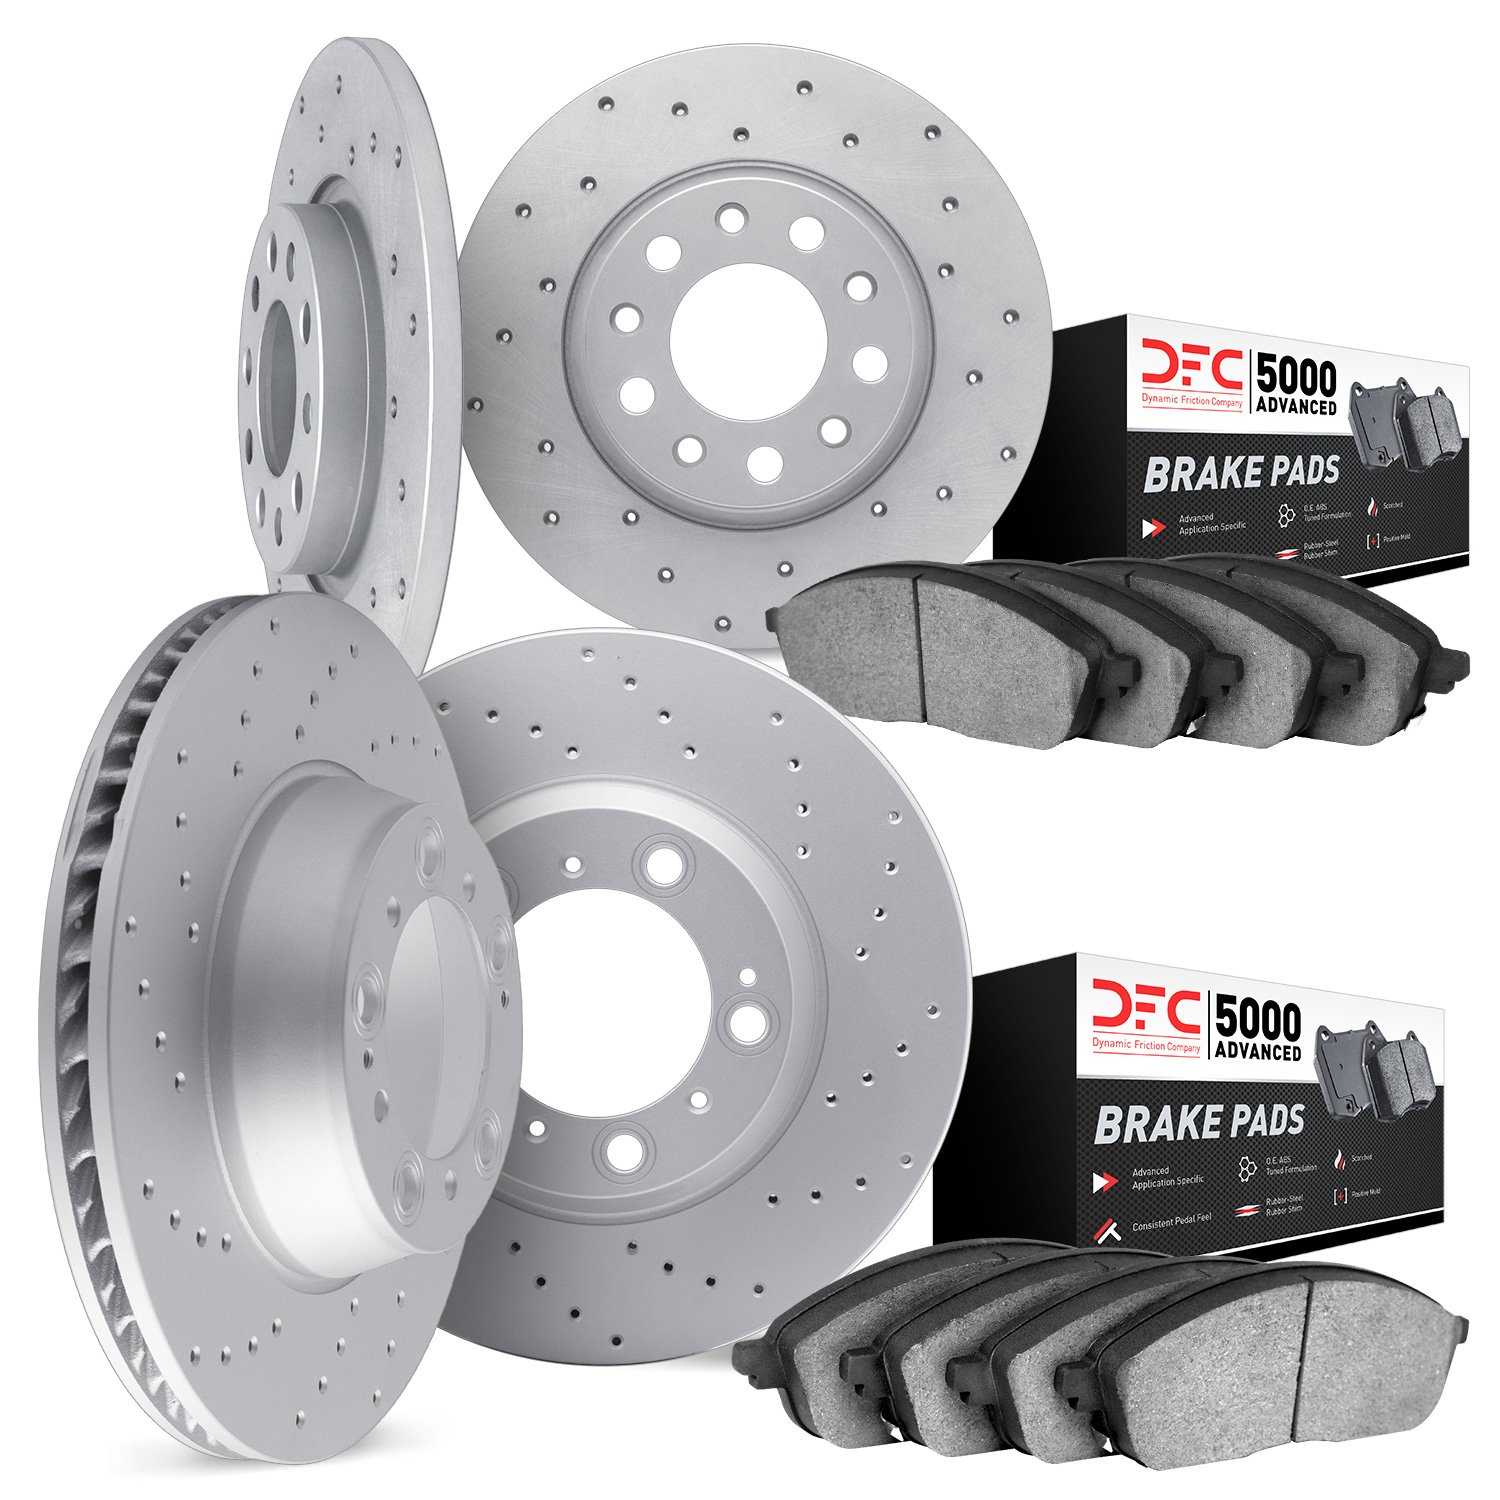 2704-59054 Geoperformance Drilled Brake Rotors with Active Performance Pads Kit, 2011-2015 Acura/Honda, Position: Front and Rear